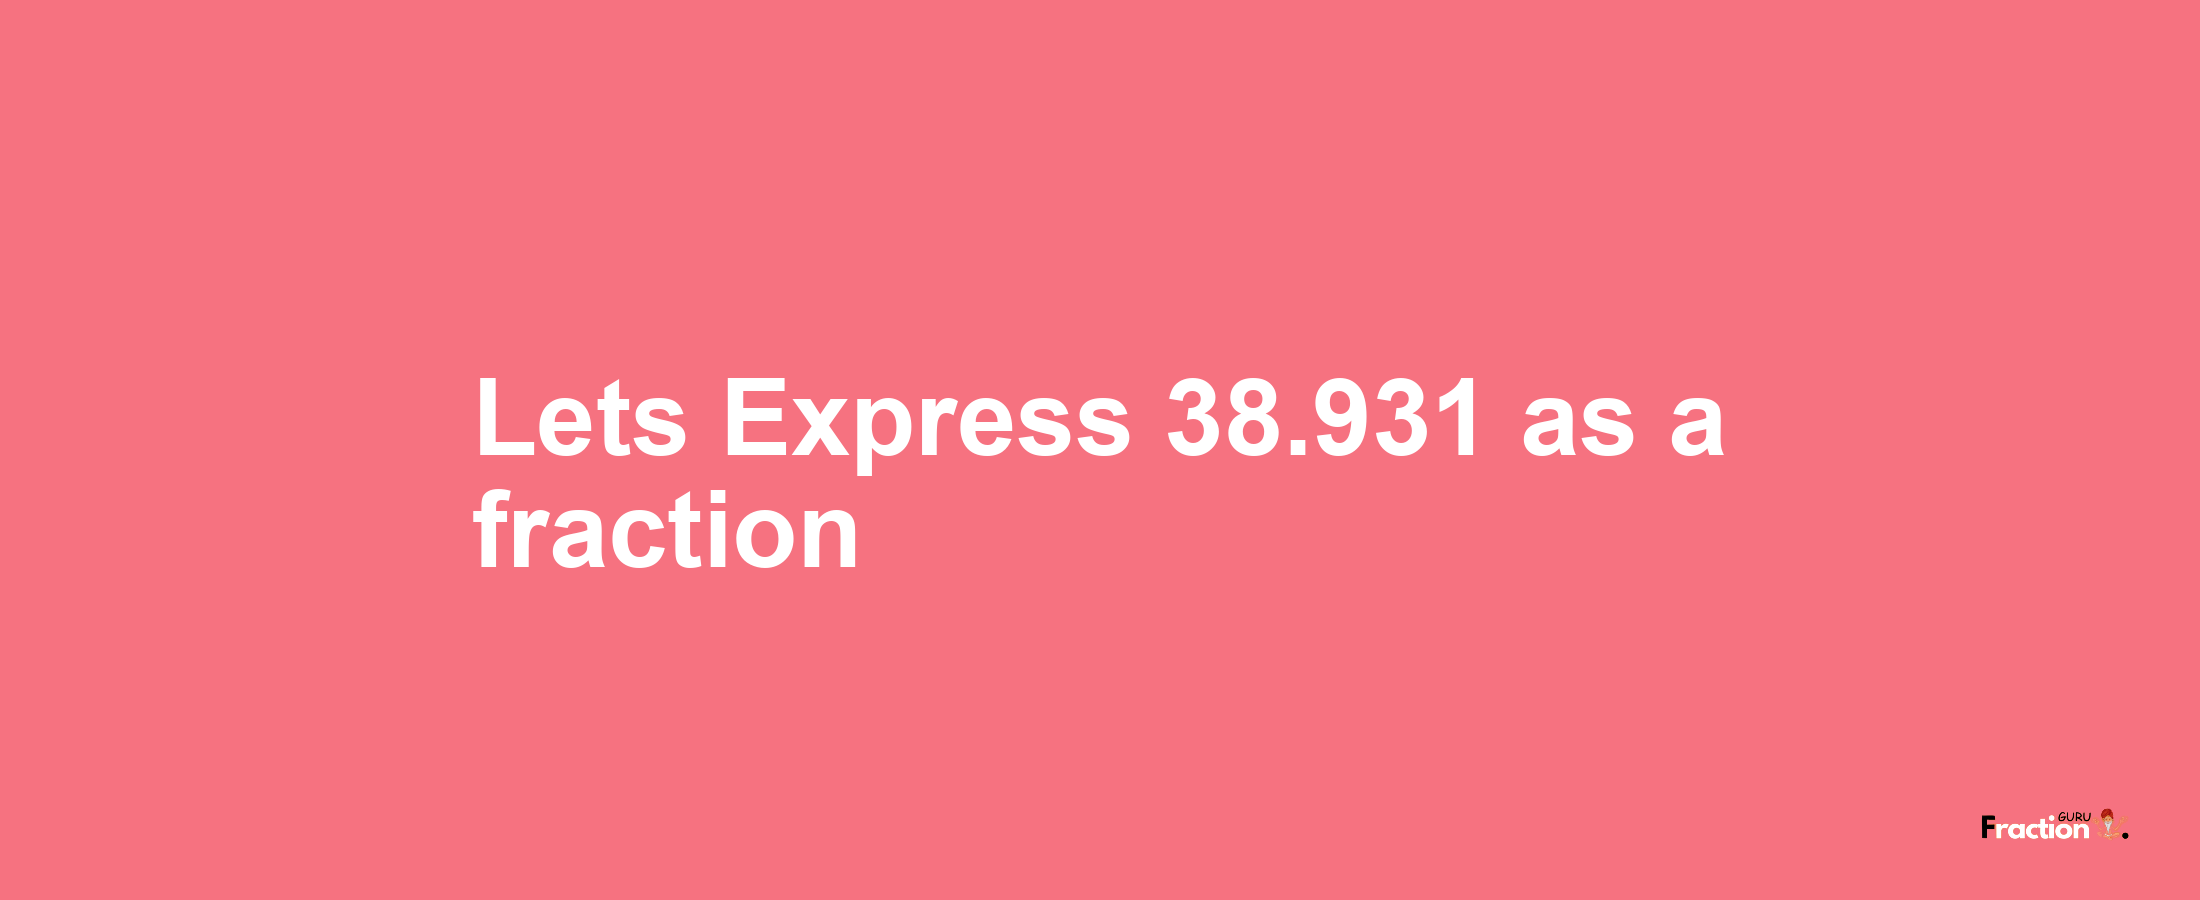 Lets Express 38.931 as afraction